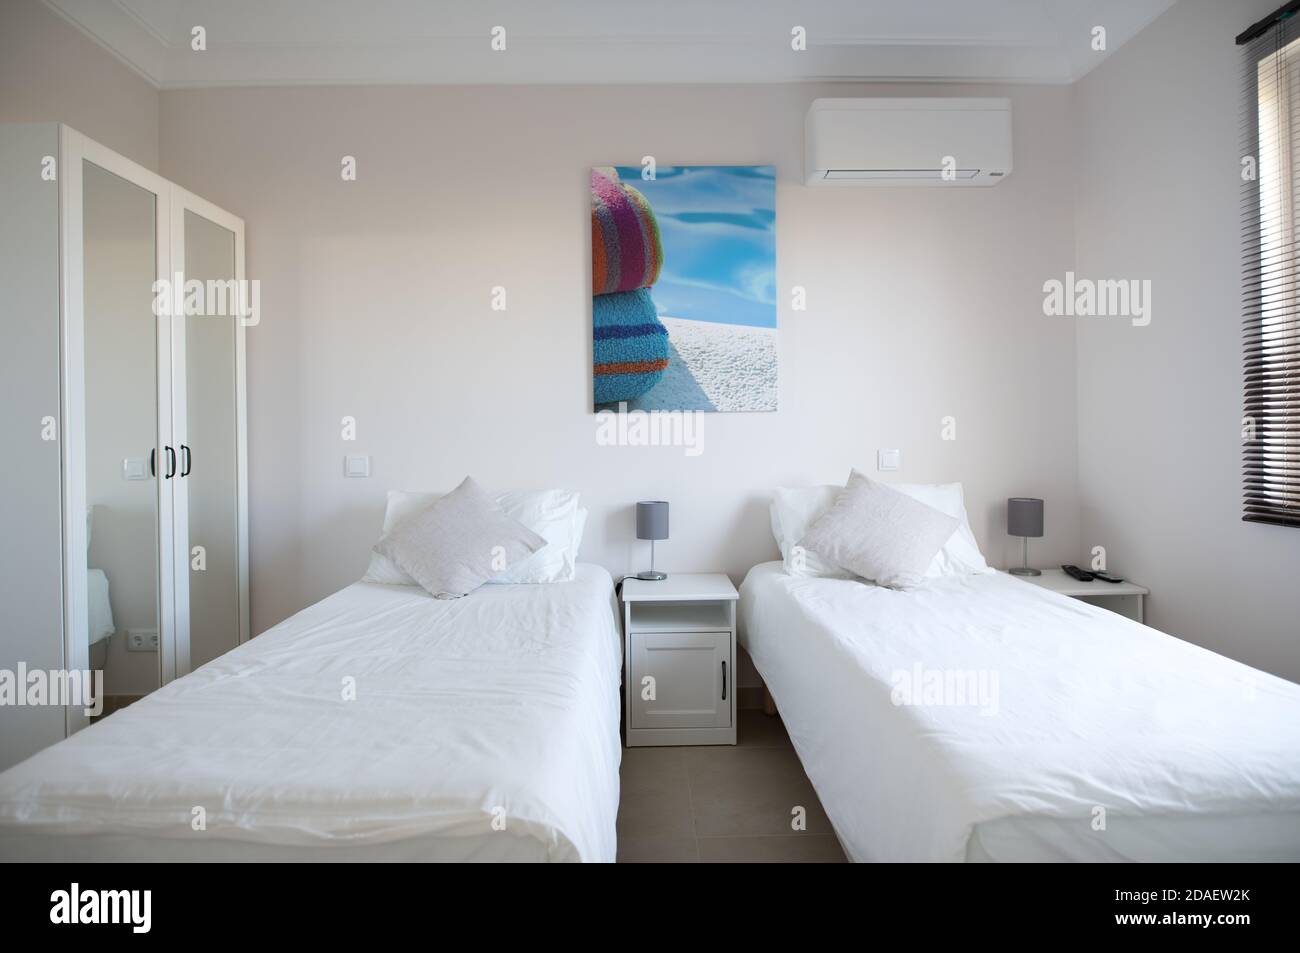 Clean twin bedroom in a house with white bed linen and white walls wardrobe with mirrored doors Stock Photo